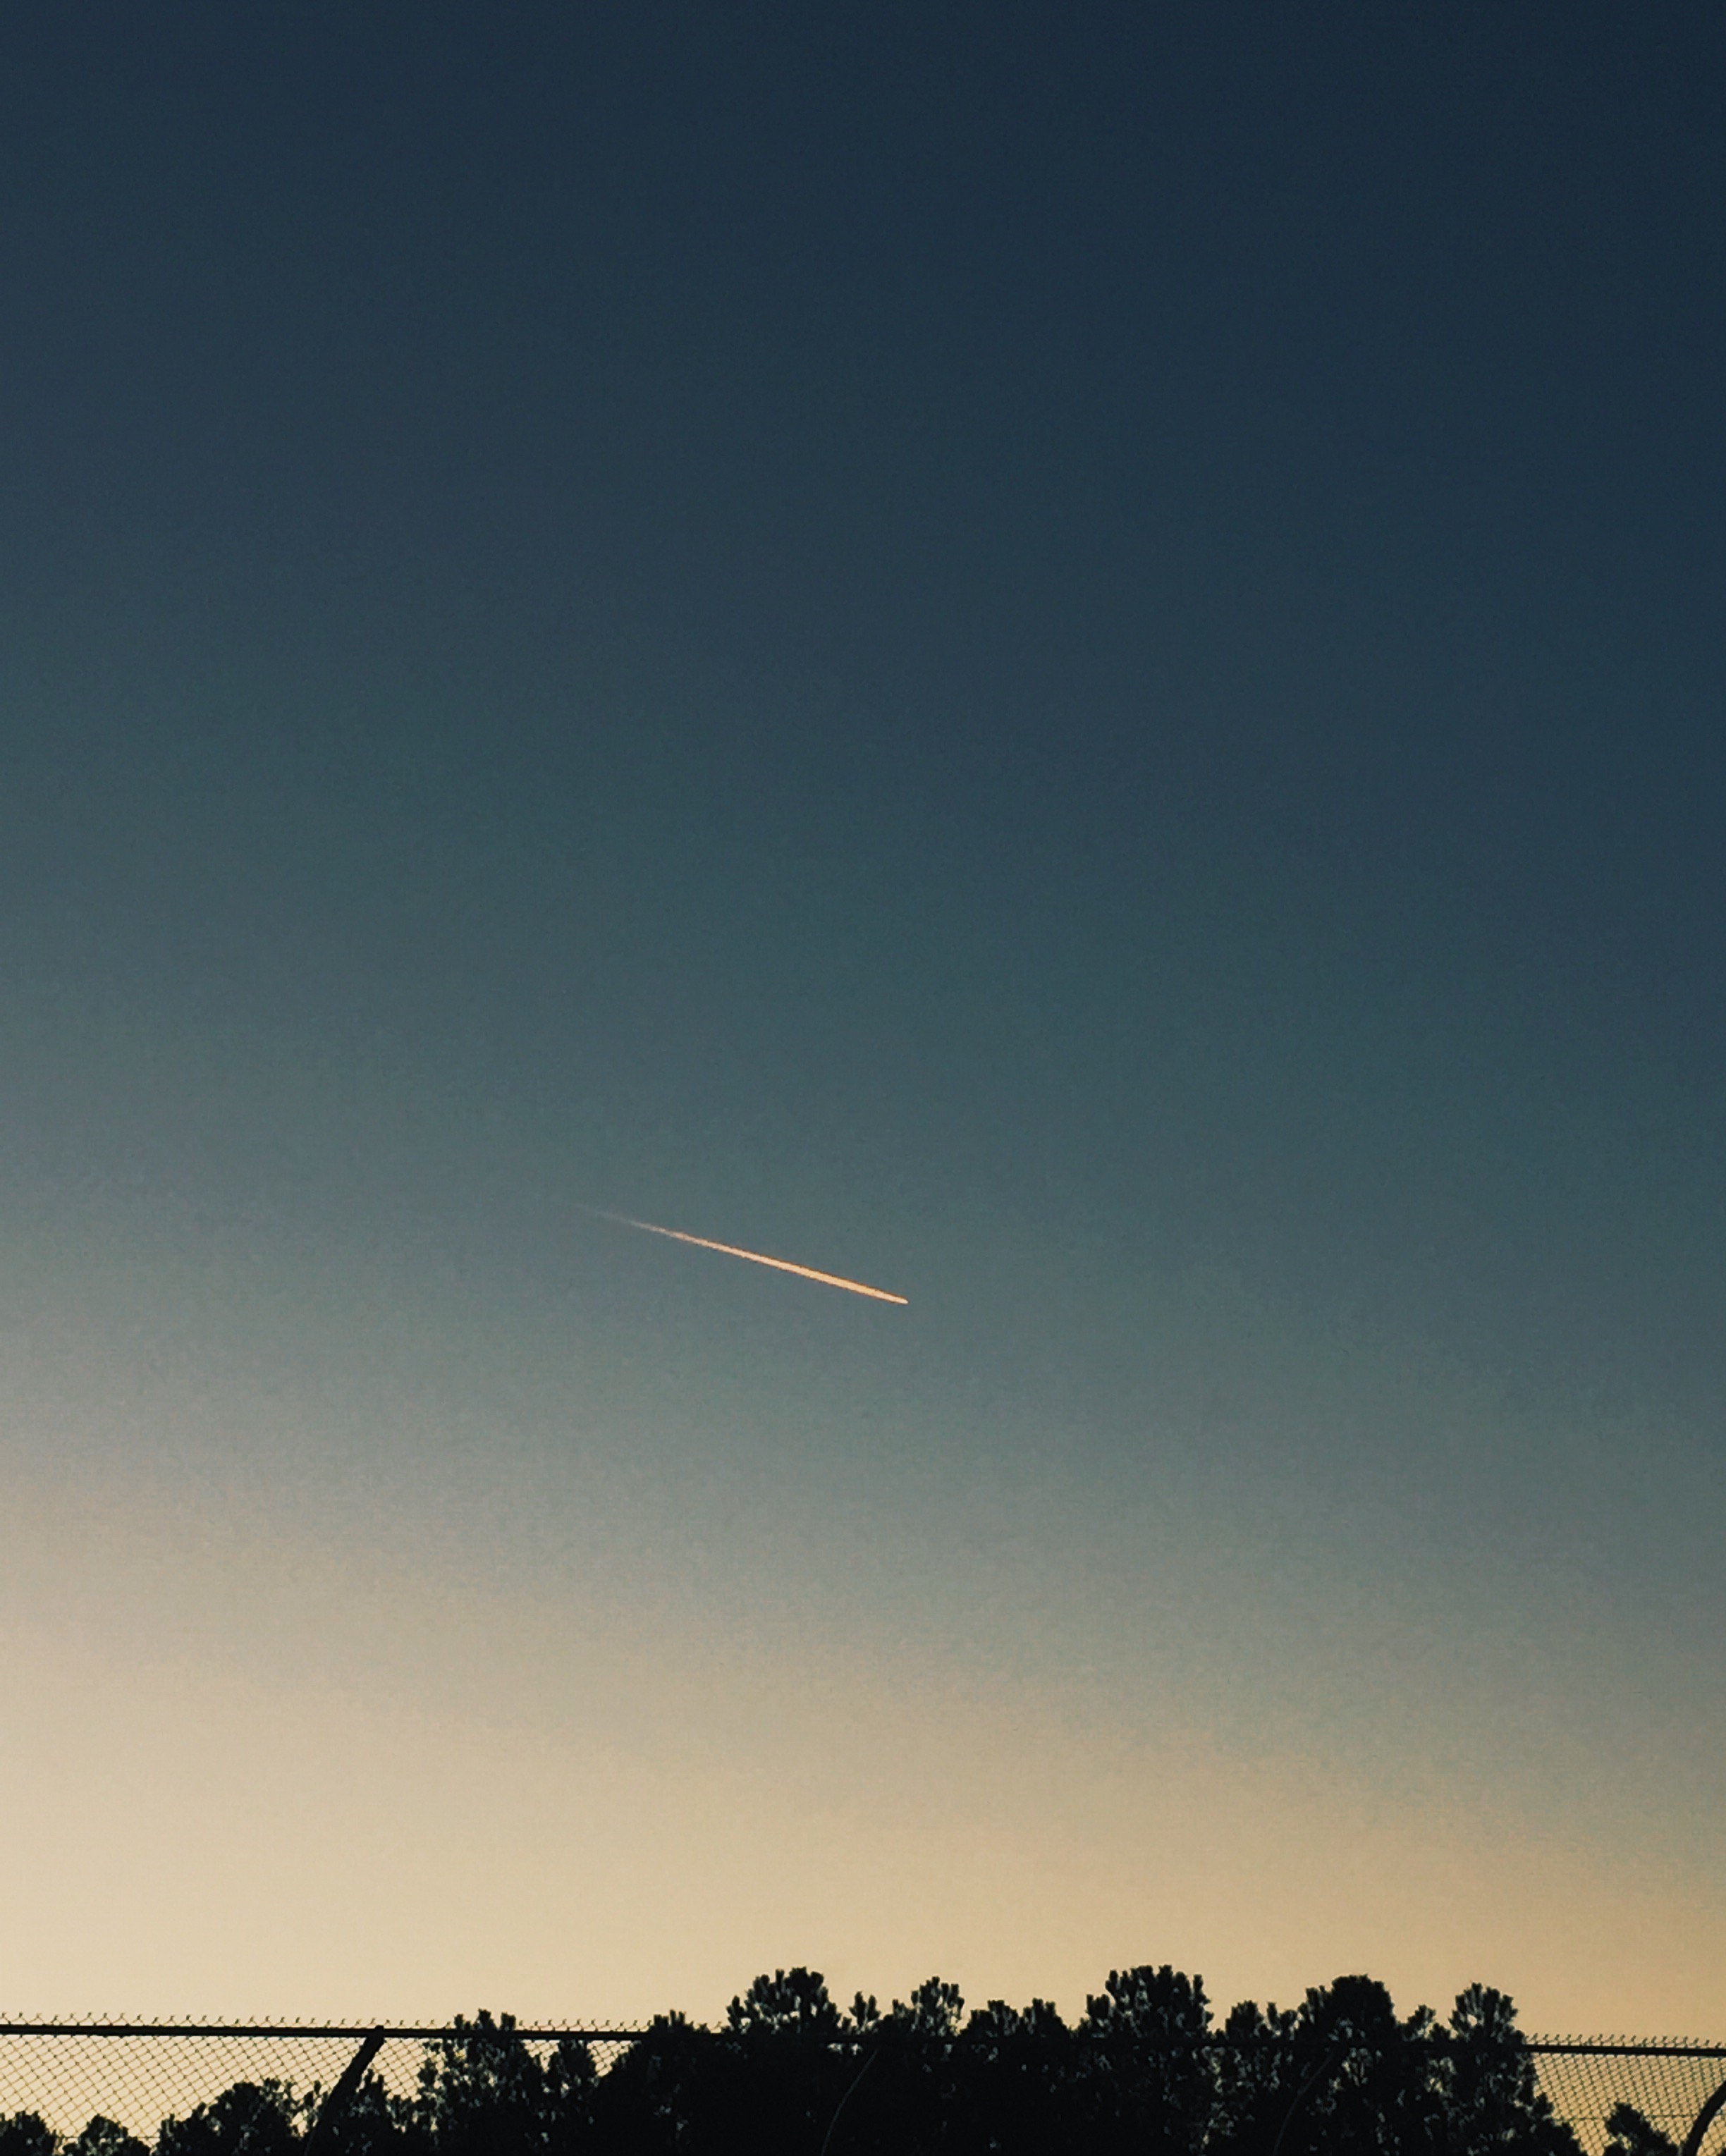 Processed with VSCO with g3 preset